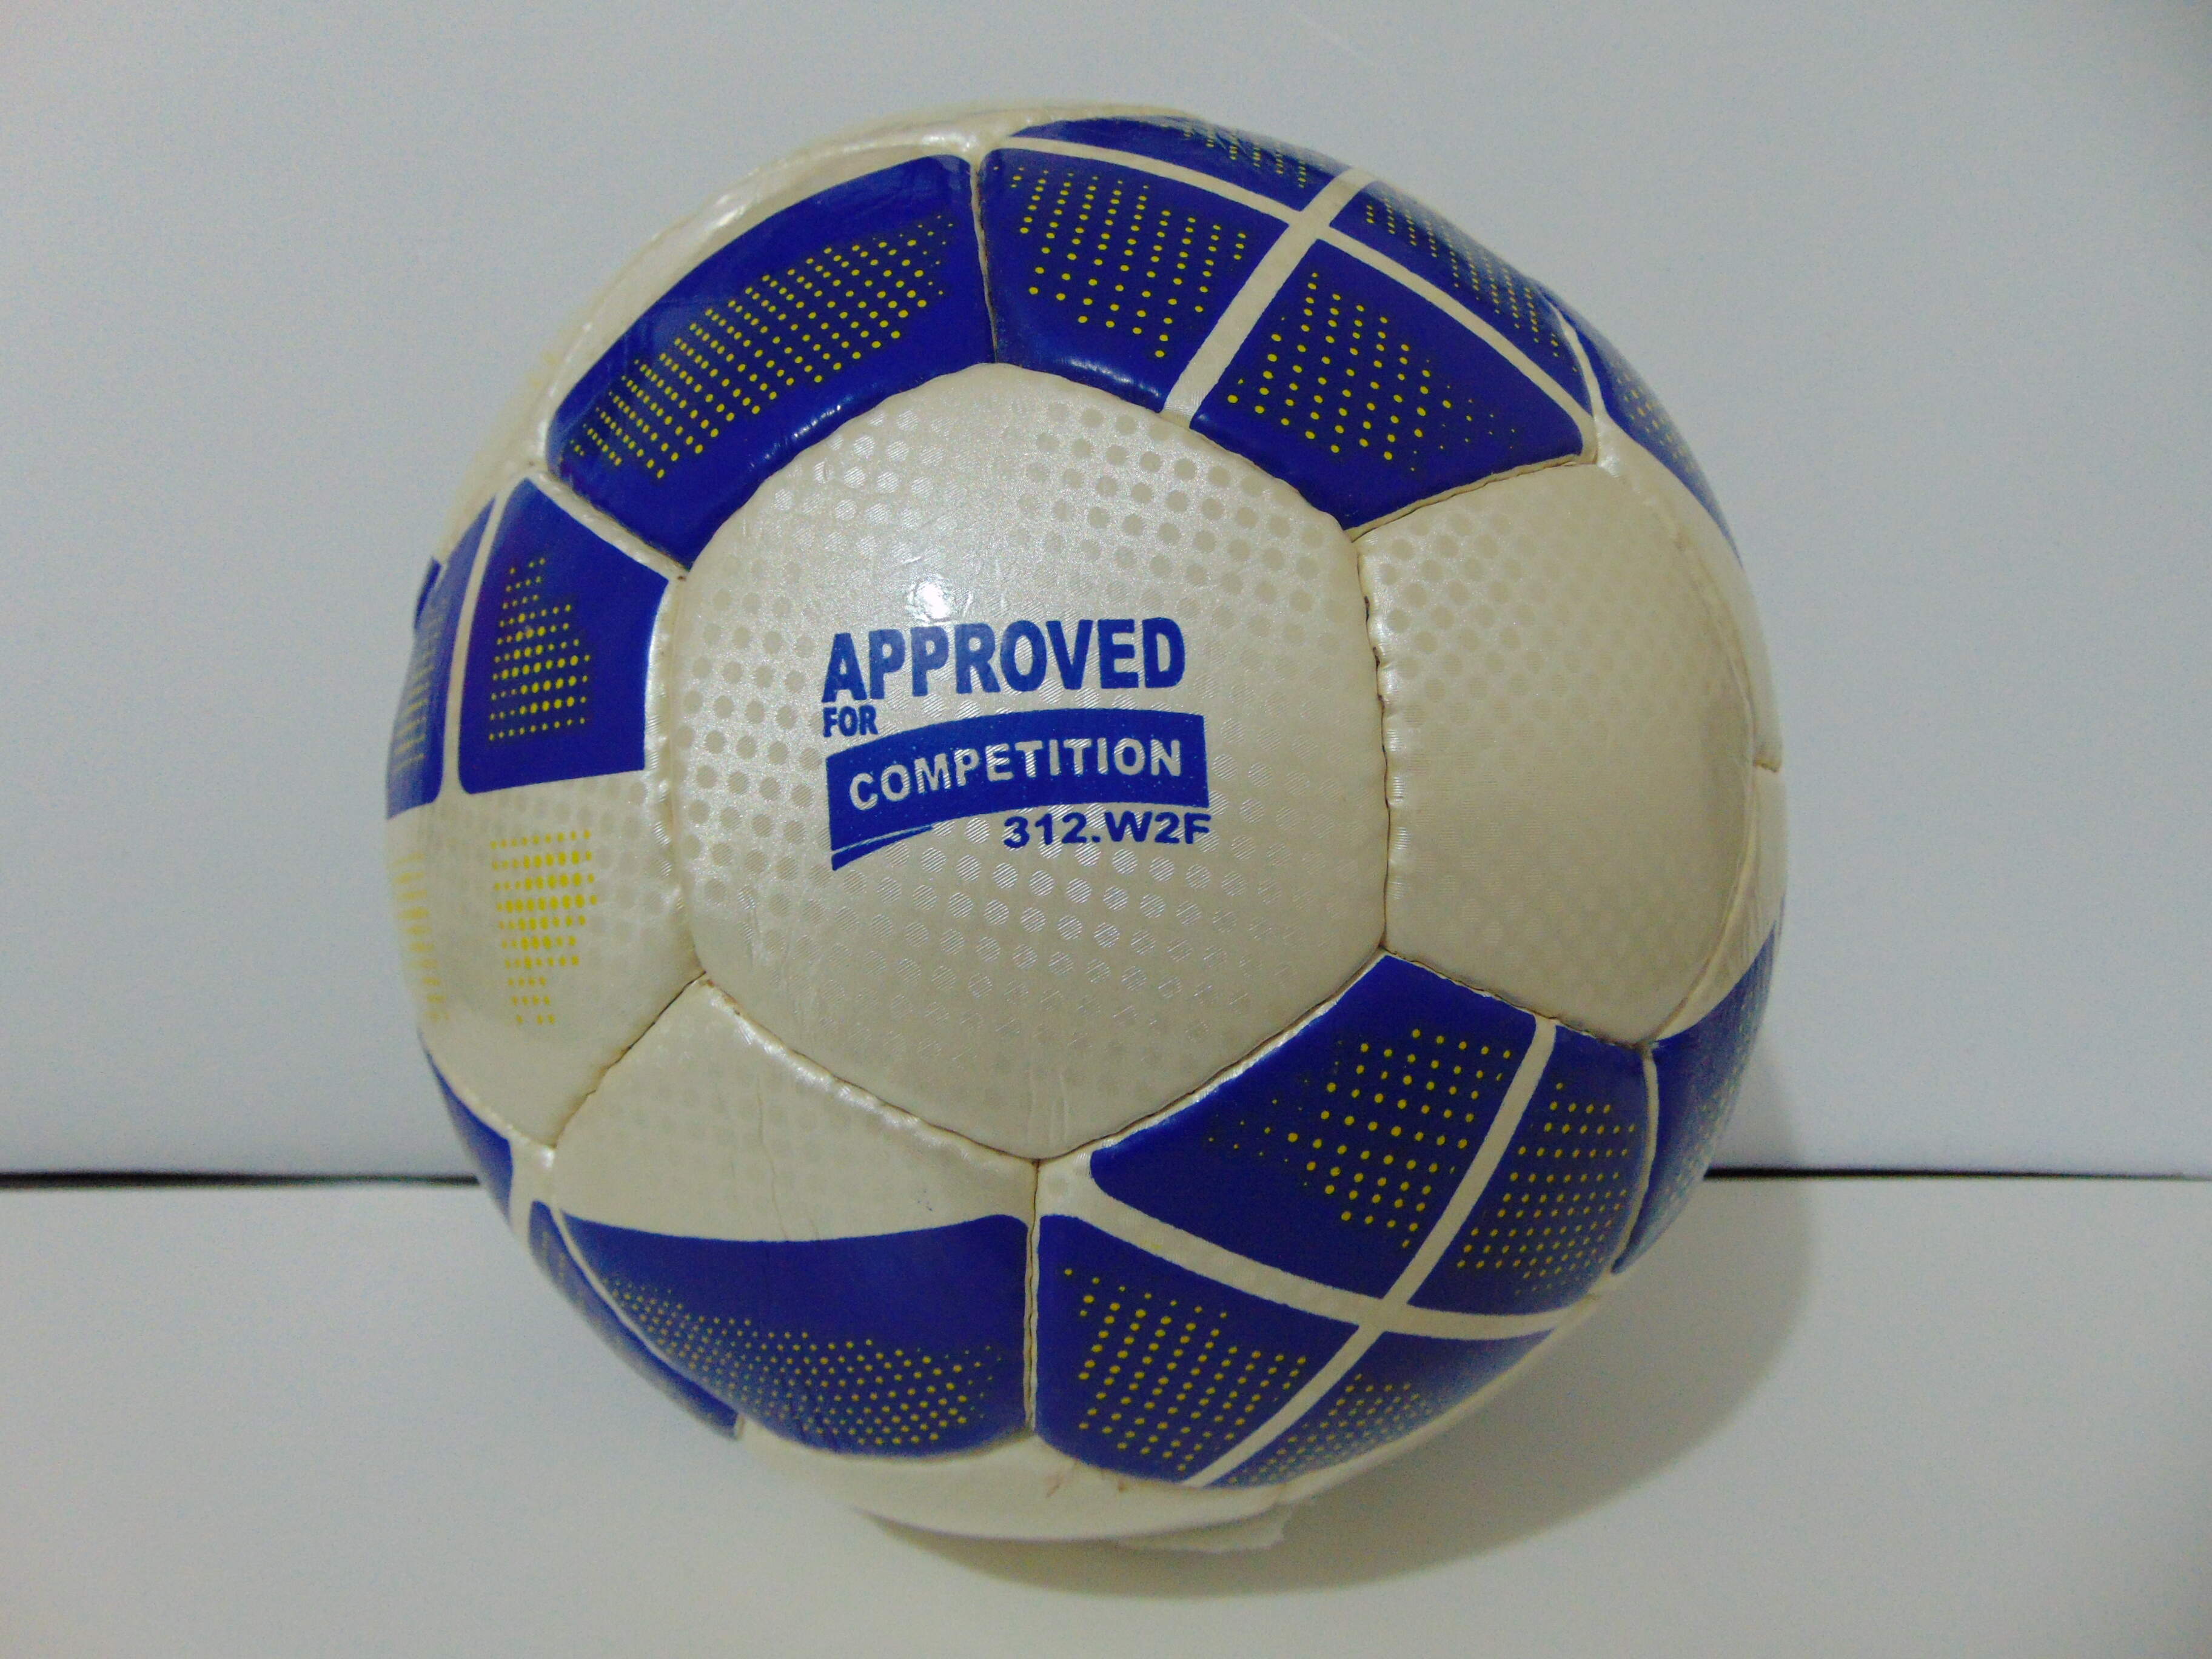 Team Match Football  Size 5 Approved Competition 312.w2f RRP £ 40.00 Now £ 12.00